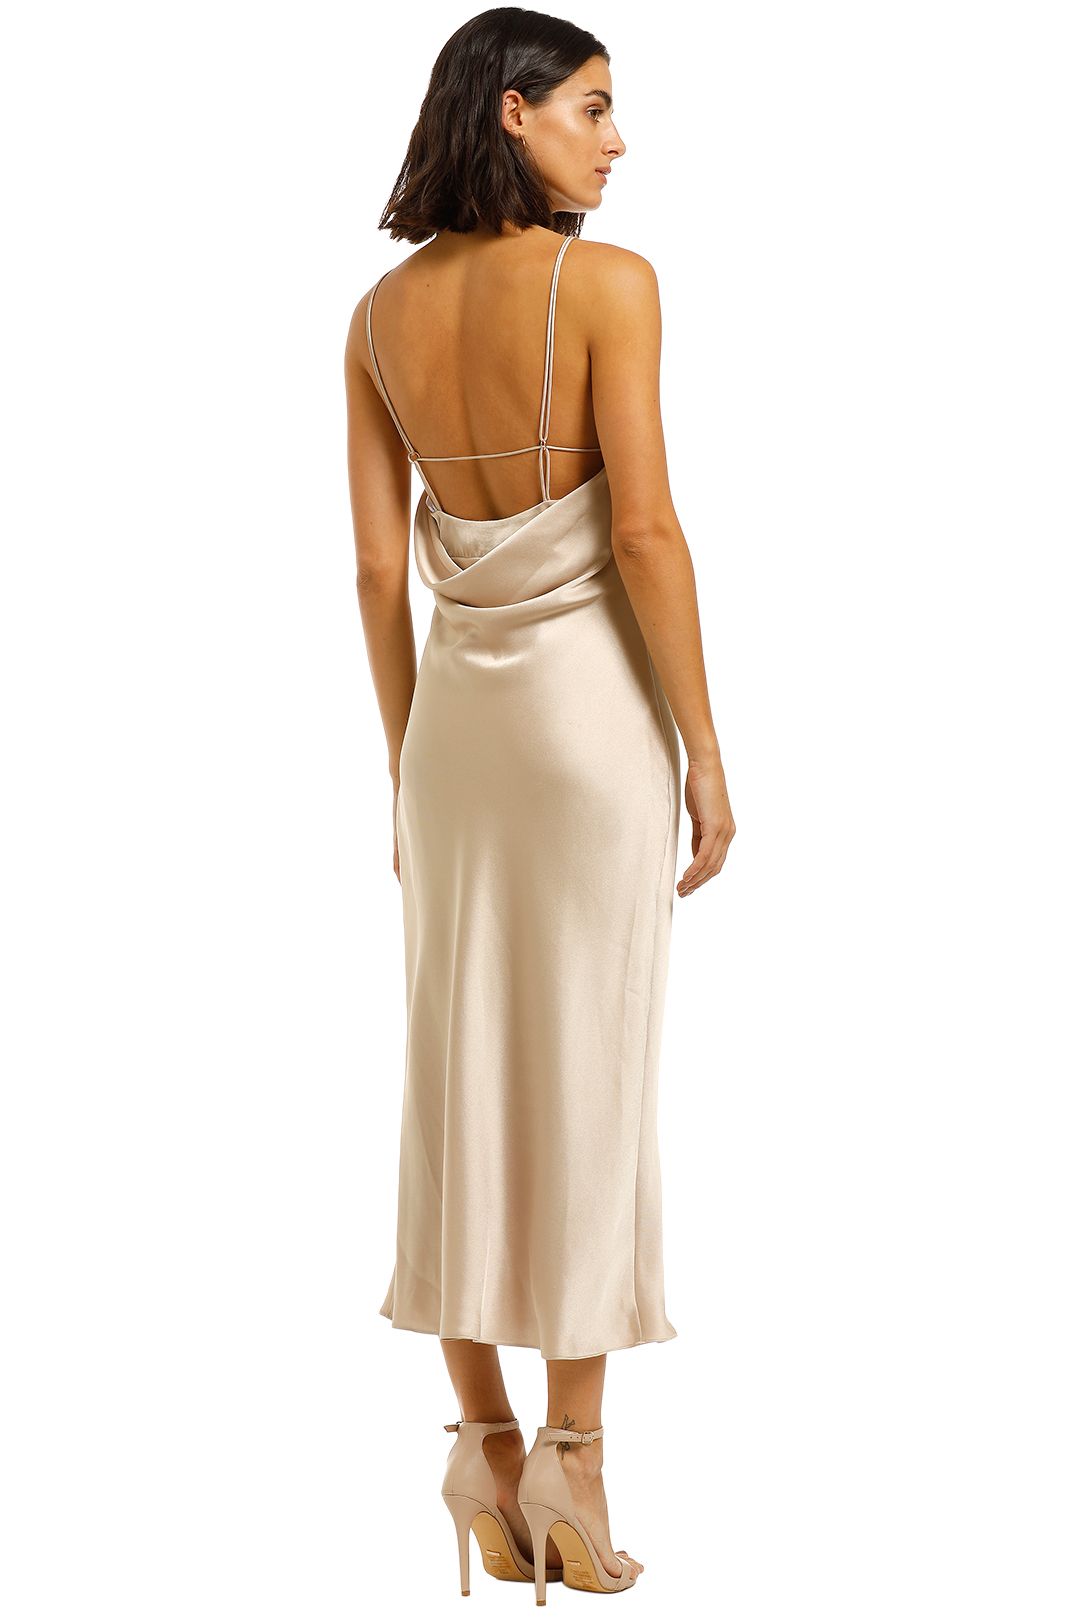 Camilla-and-Marc-Antonelli-Backless-Dress-Champagne-Back